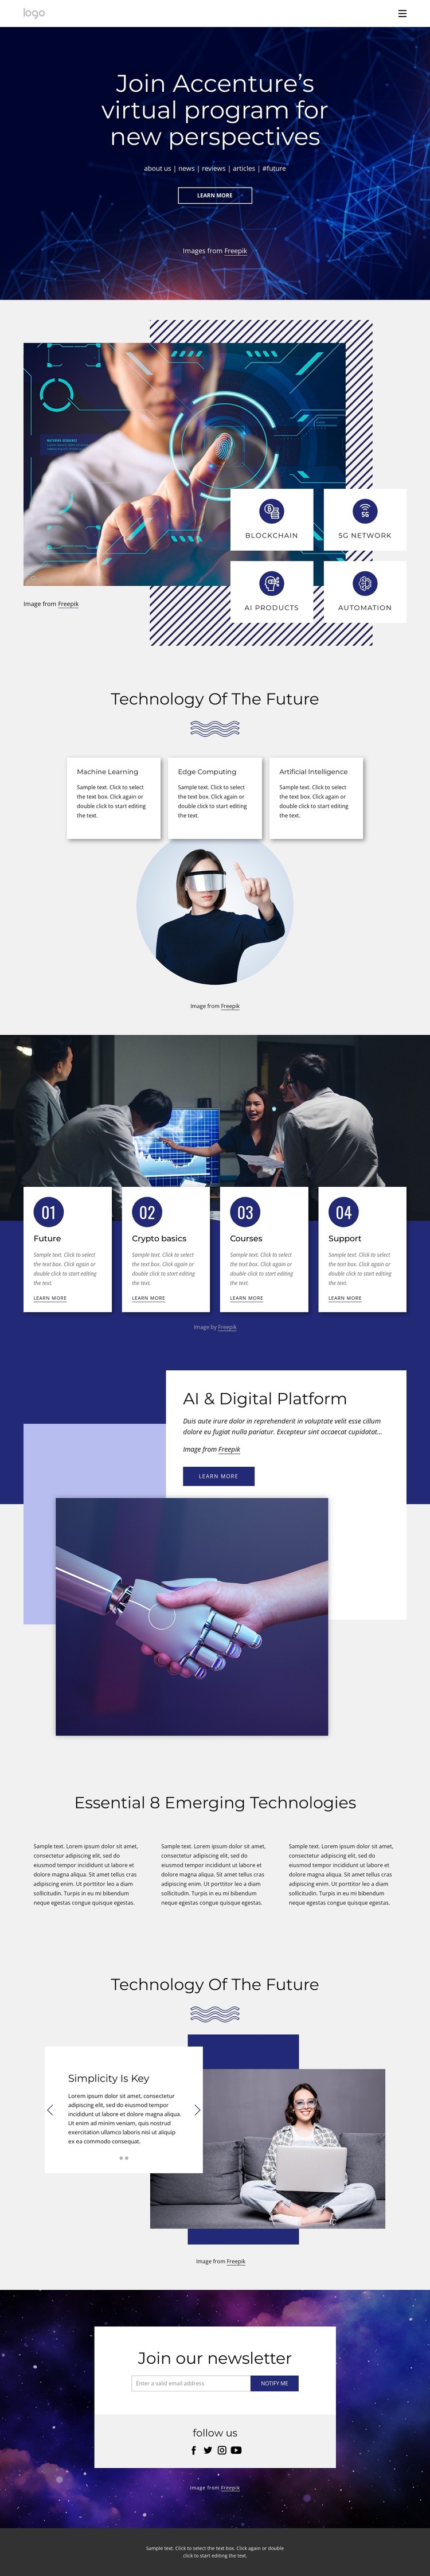 New technology perspectives HTML Template